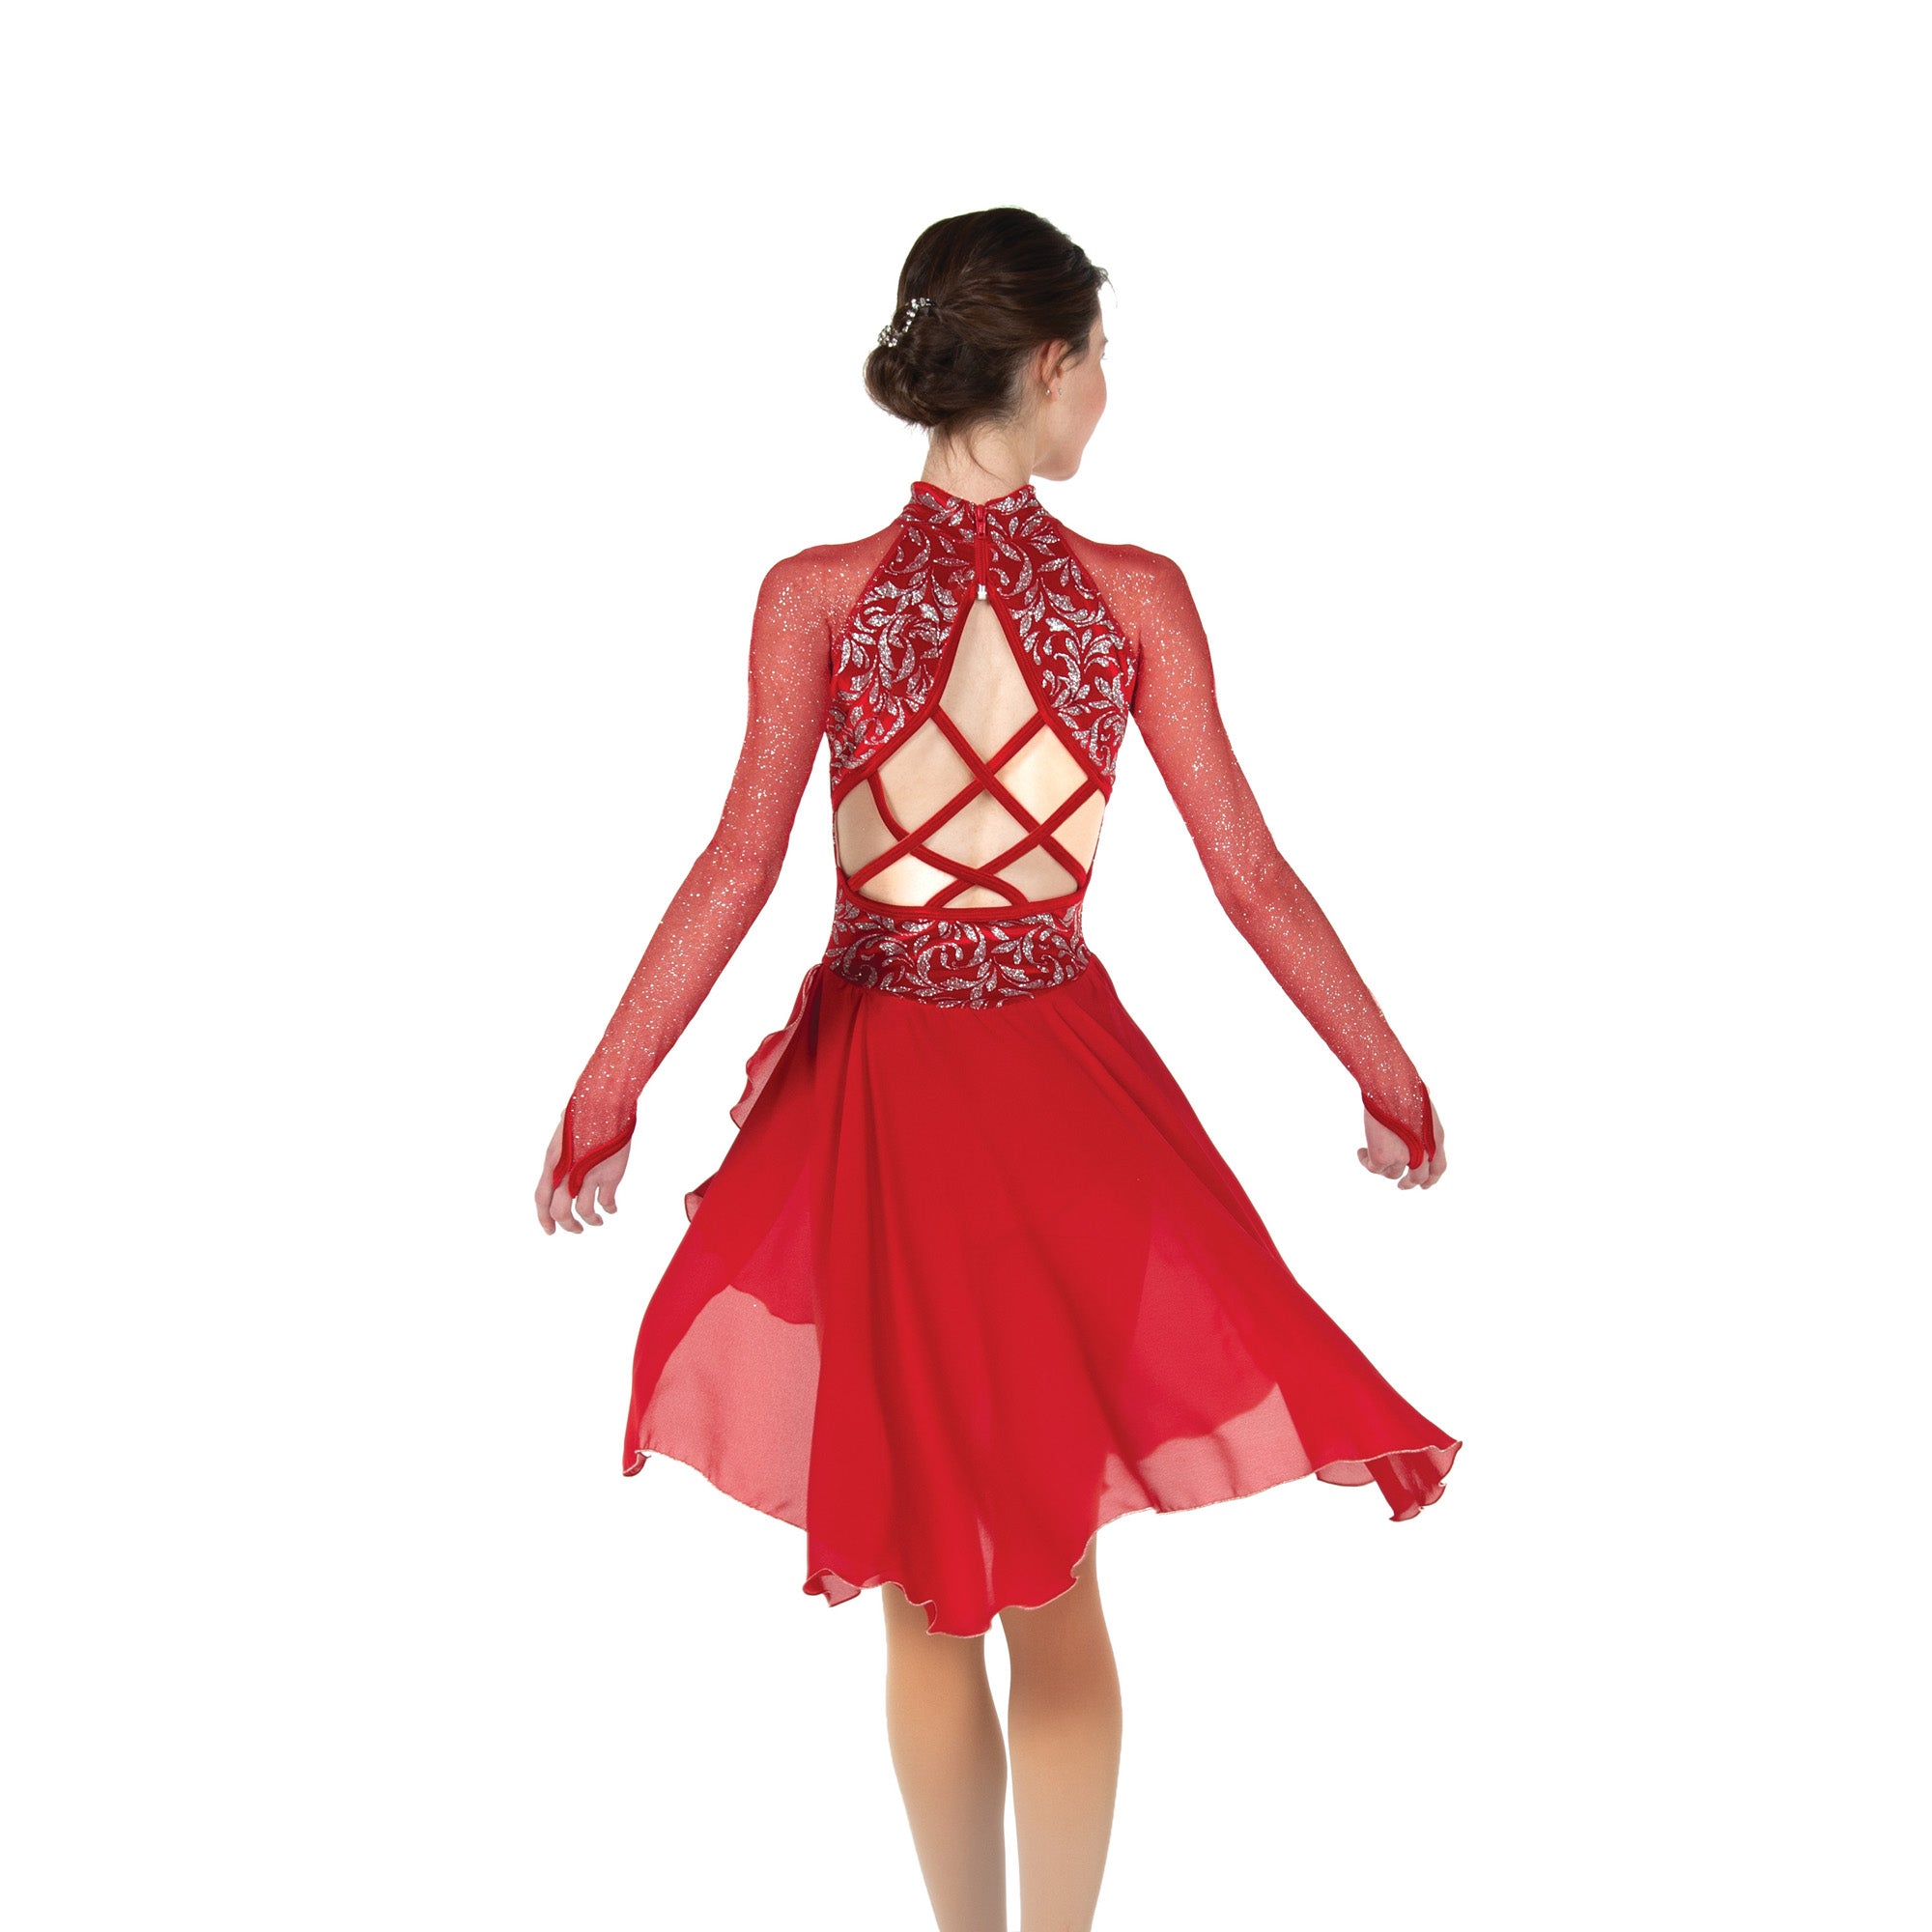 100 Trellistep Dance Dress in Red by Jerry's